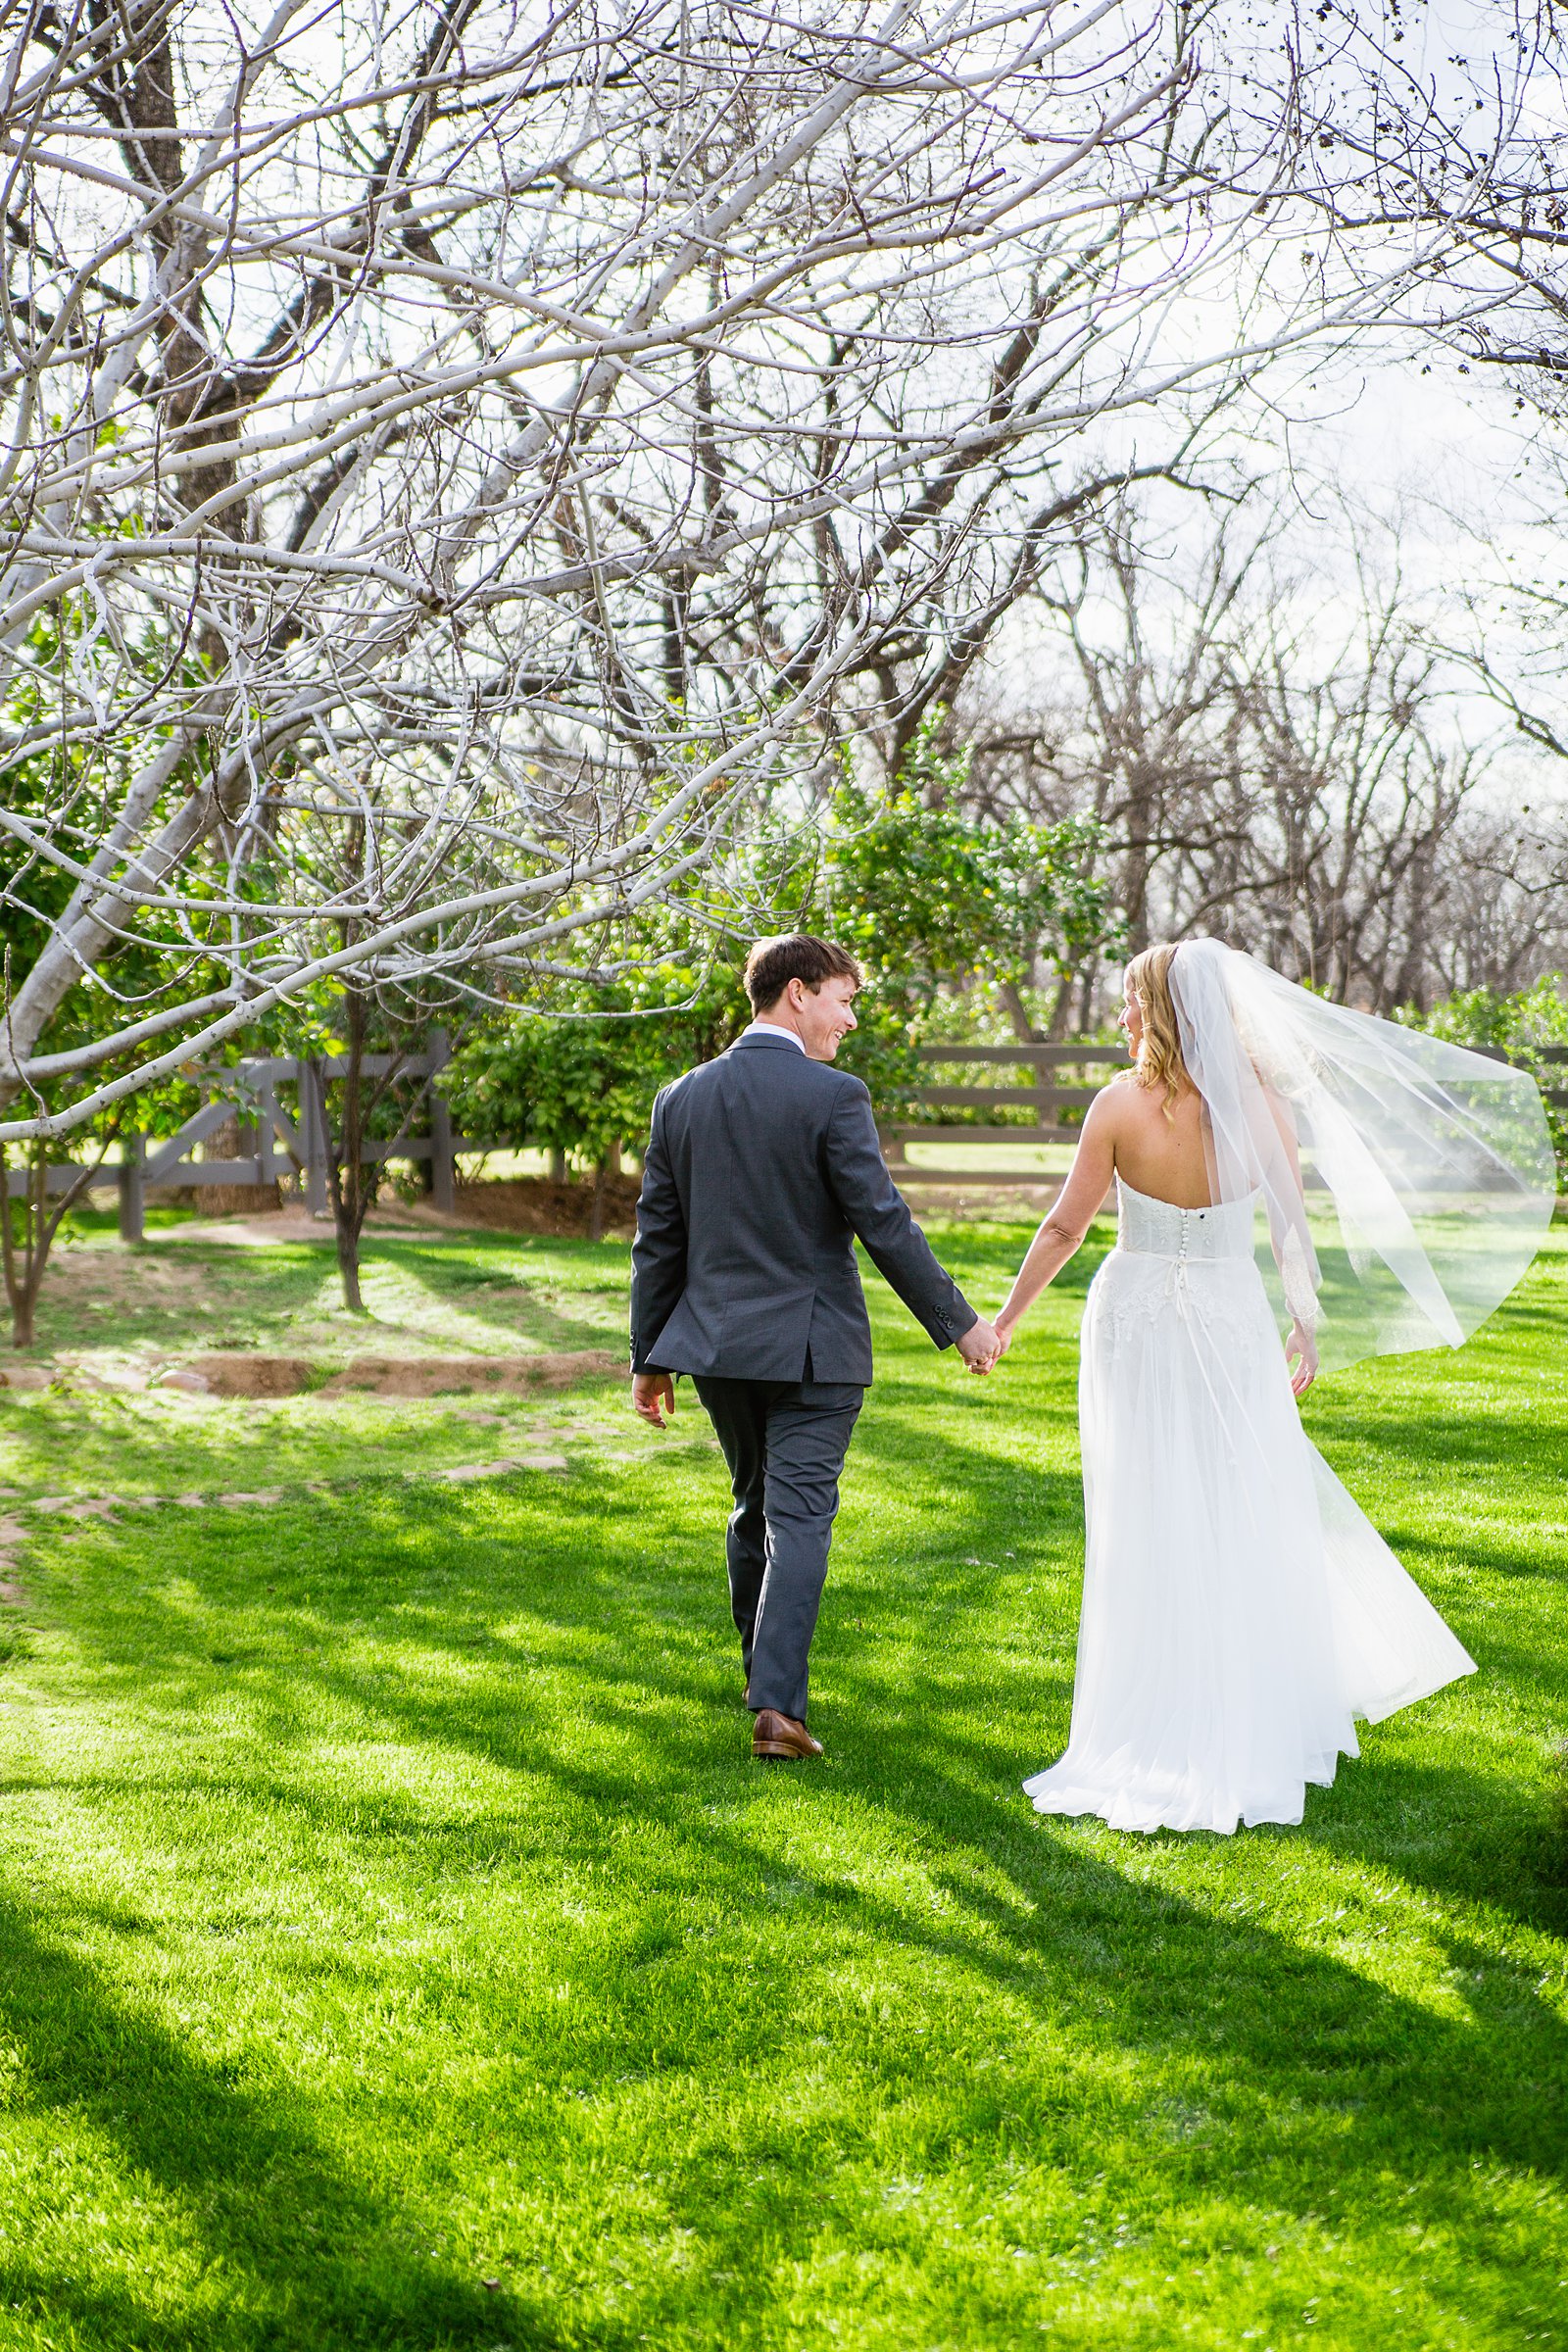 Bride and Groom walking together during their Venue At The Grove wedding by Phoenix wedding photographer PMA Photography.